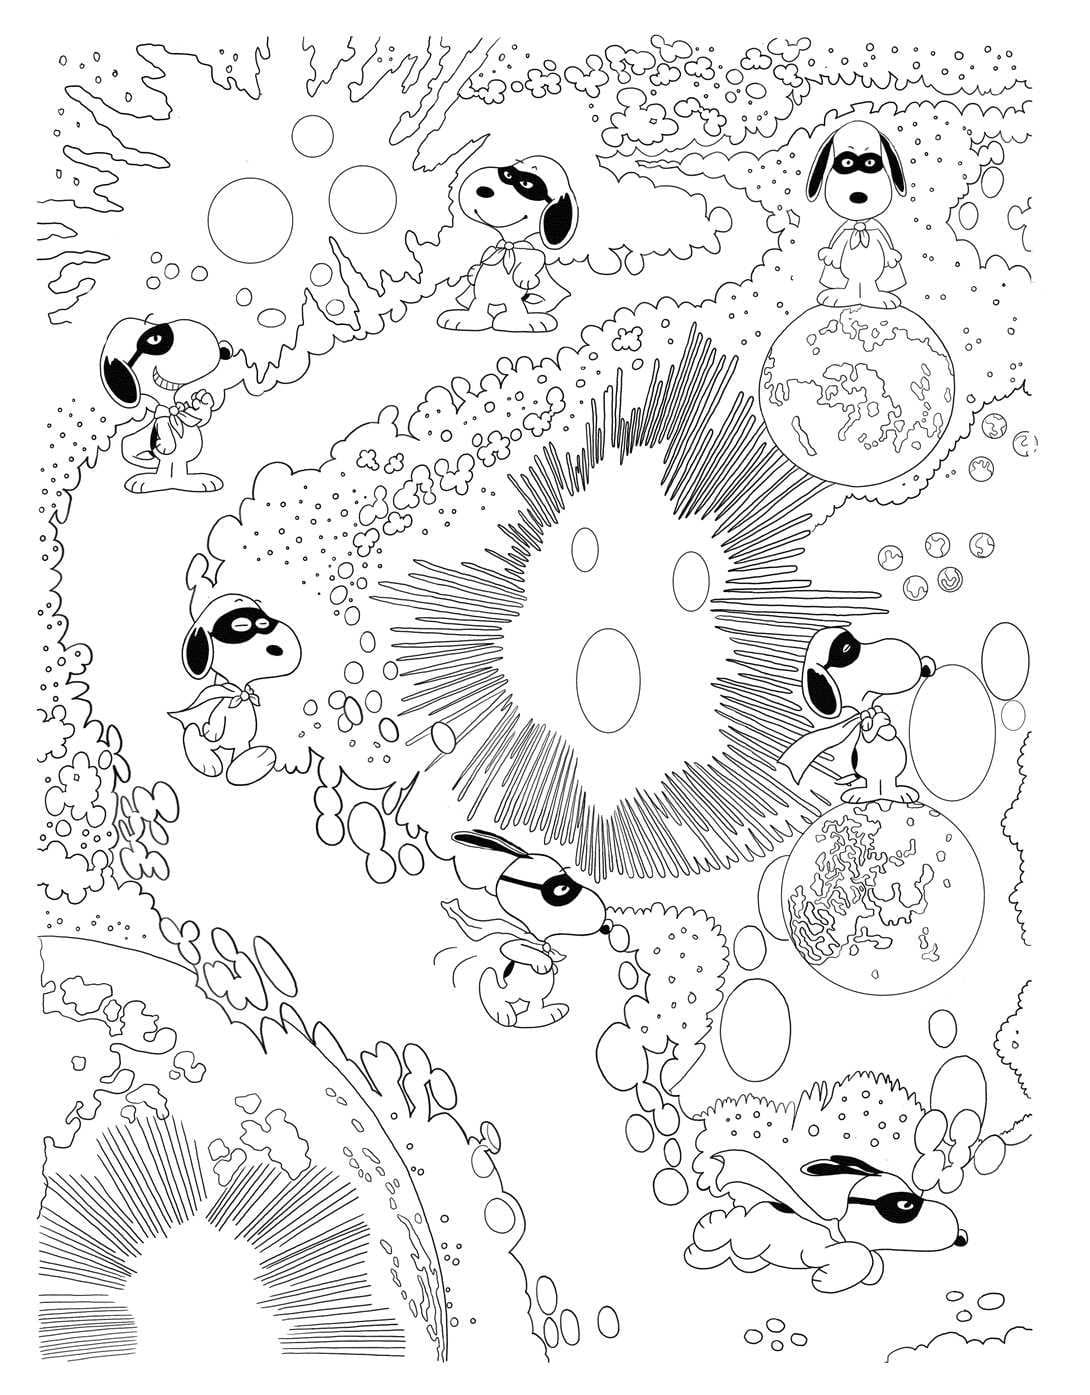 snoopy-coloring-pages-print-in-a4-format-wonder-day-coloring-pages